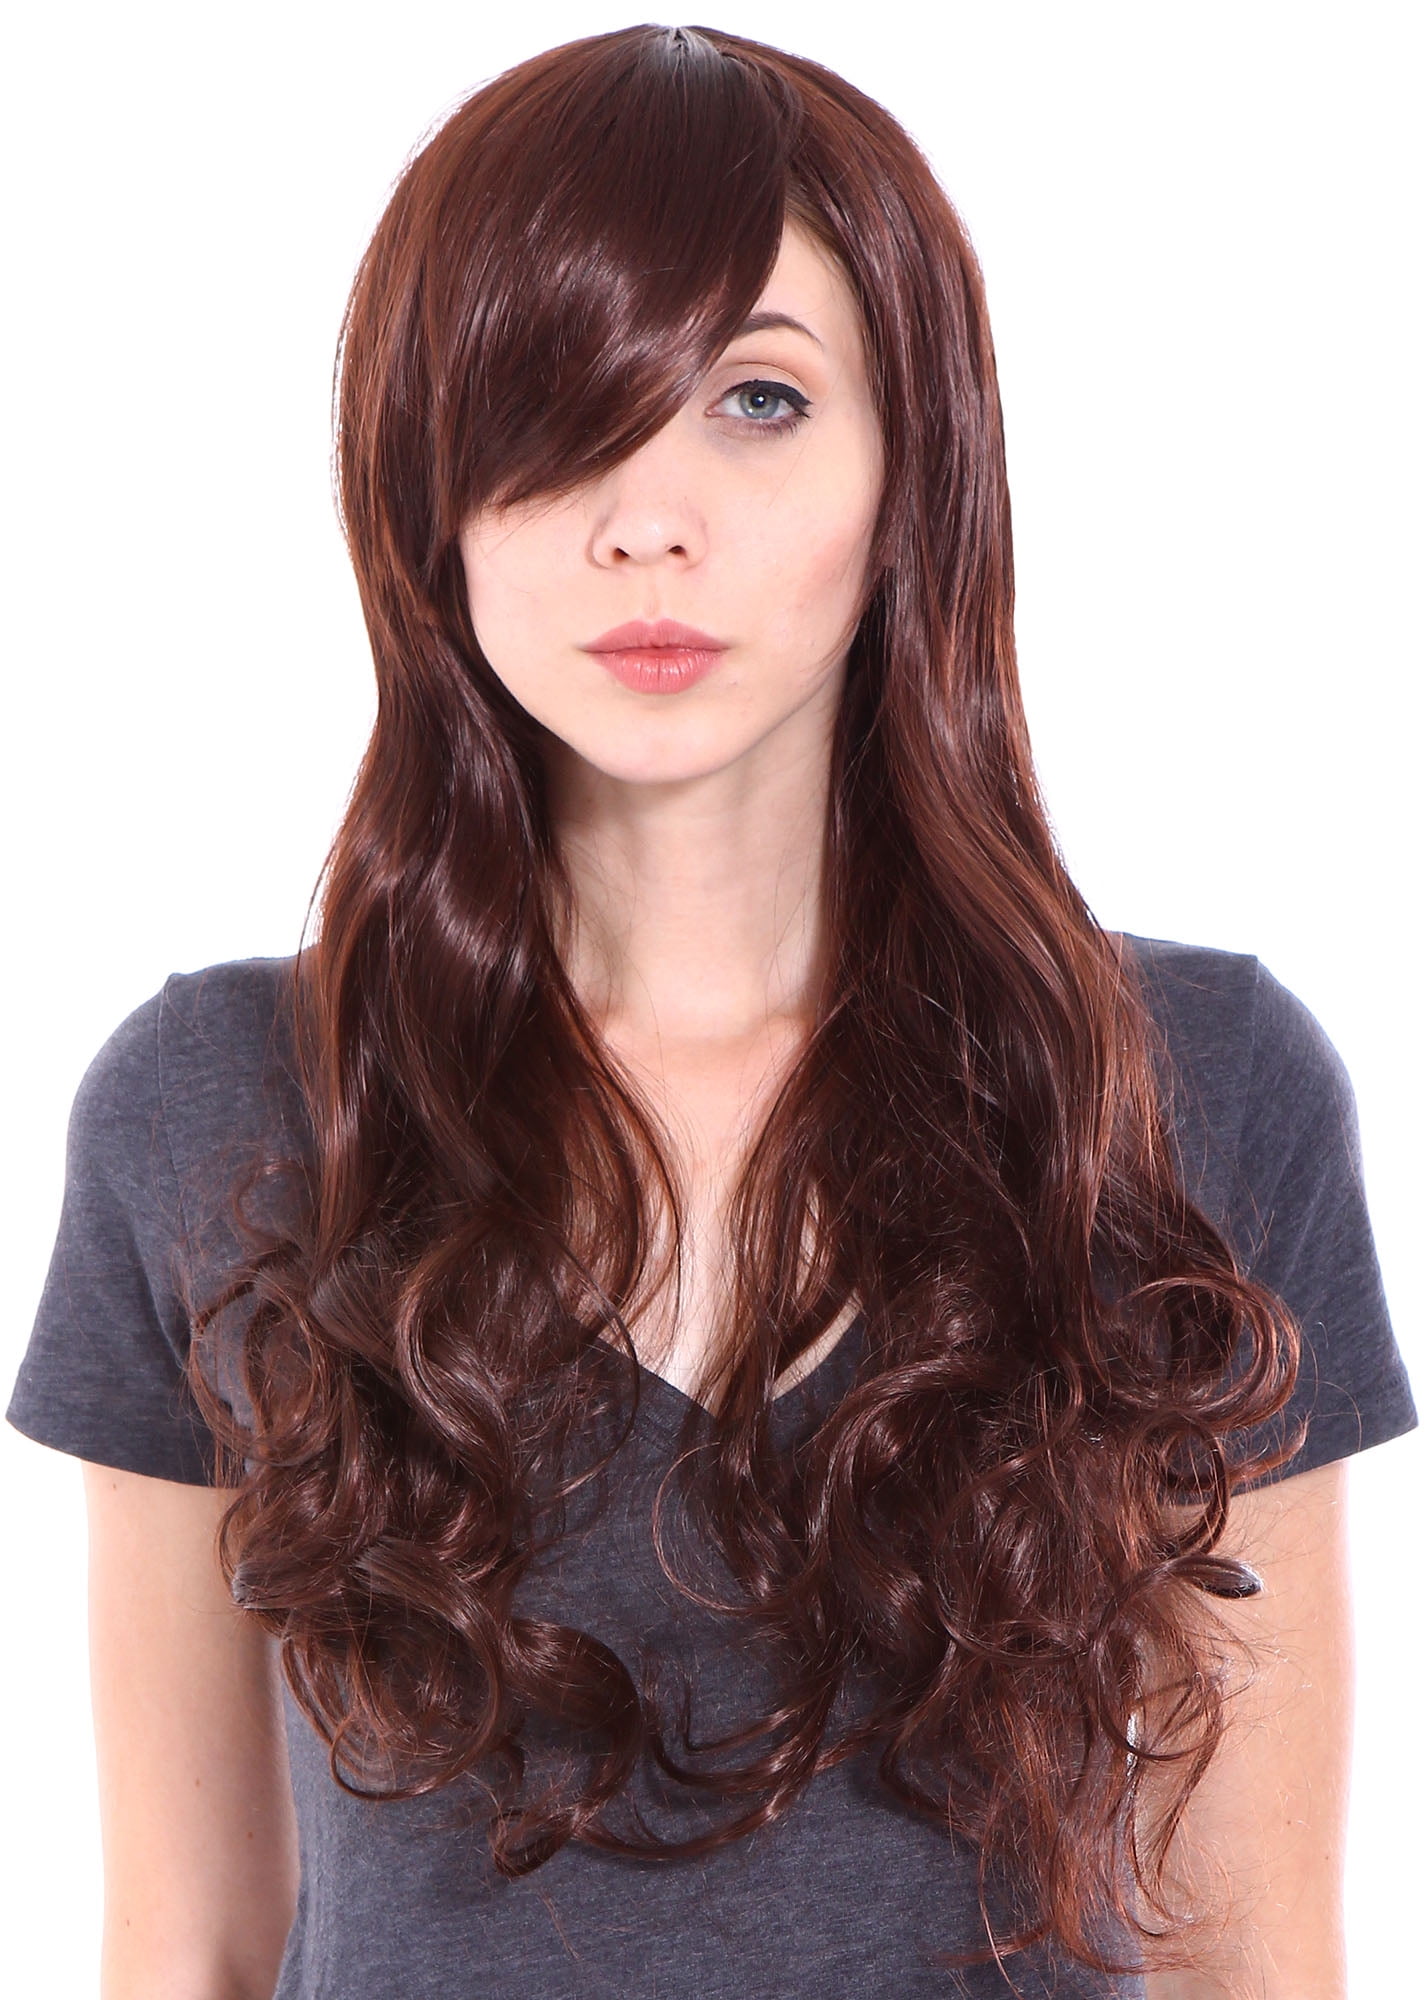 Simplicity High Quality Long Curly Full Wig Wavy Cosplay Party Wigs Dark Brown 